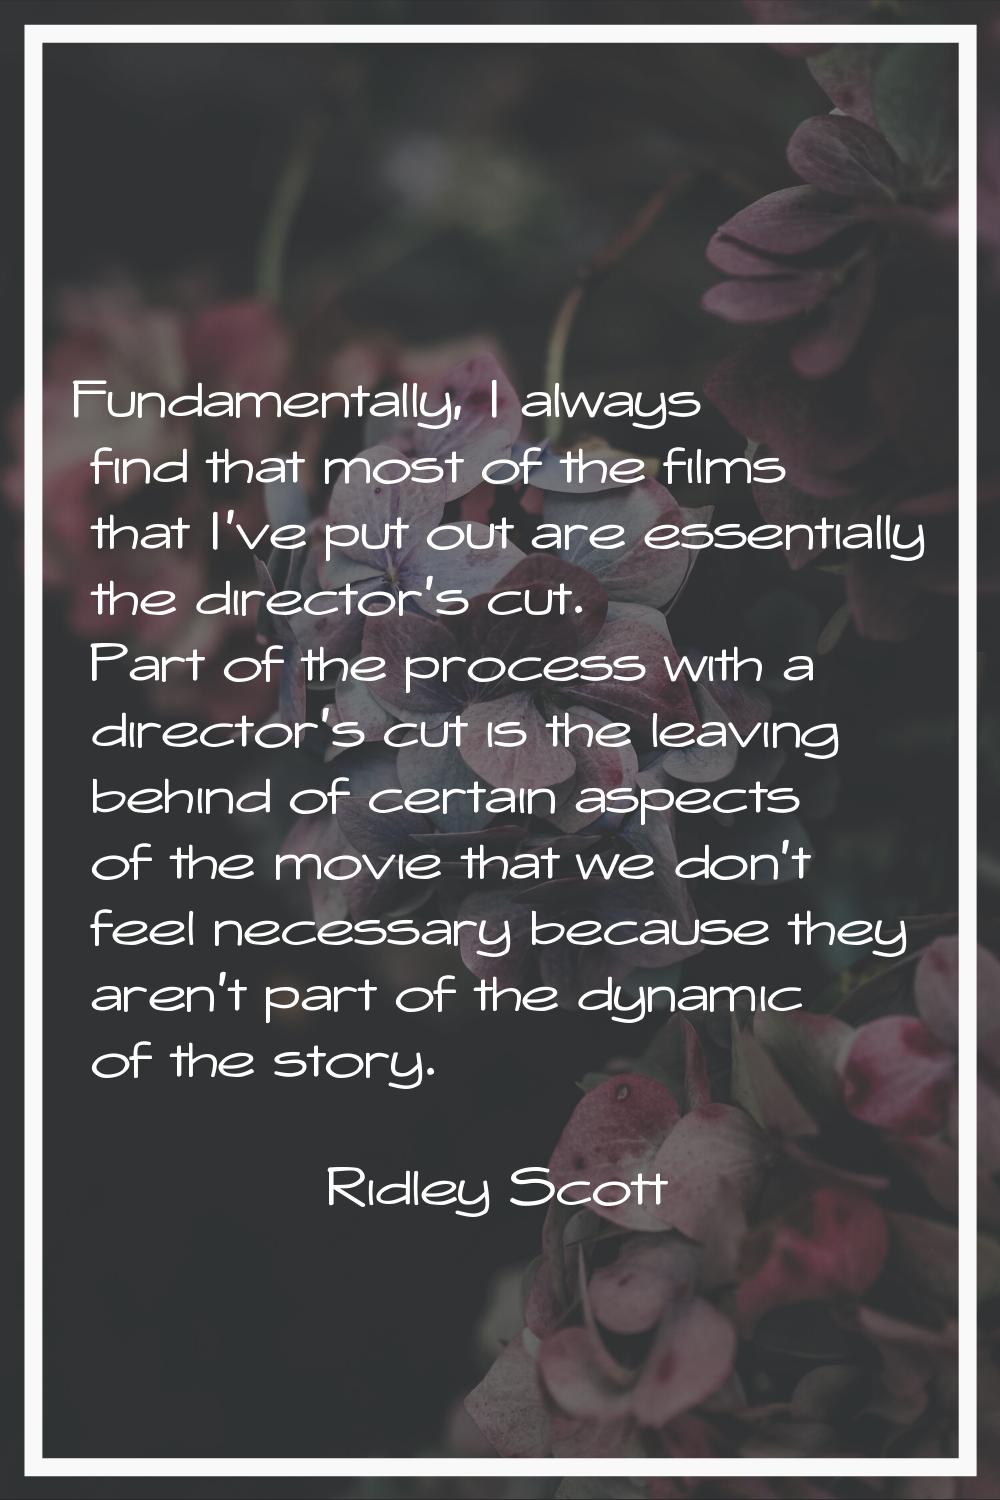 Fundamentally, I always find that most of the films that I've put out are essentially the director'